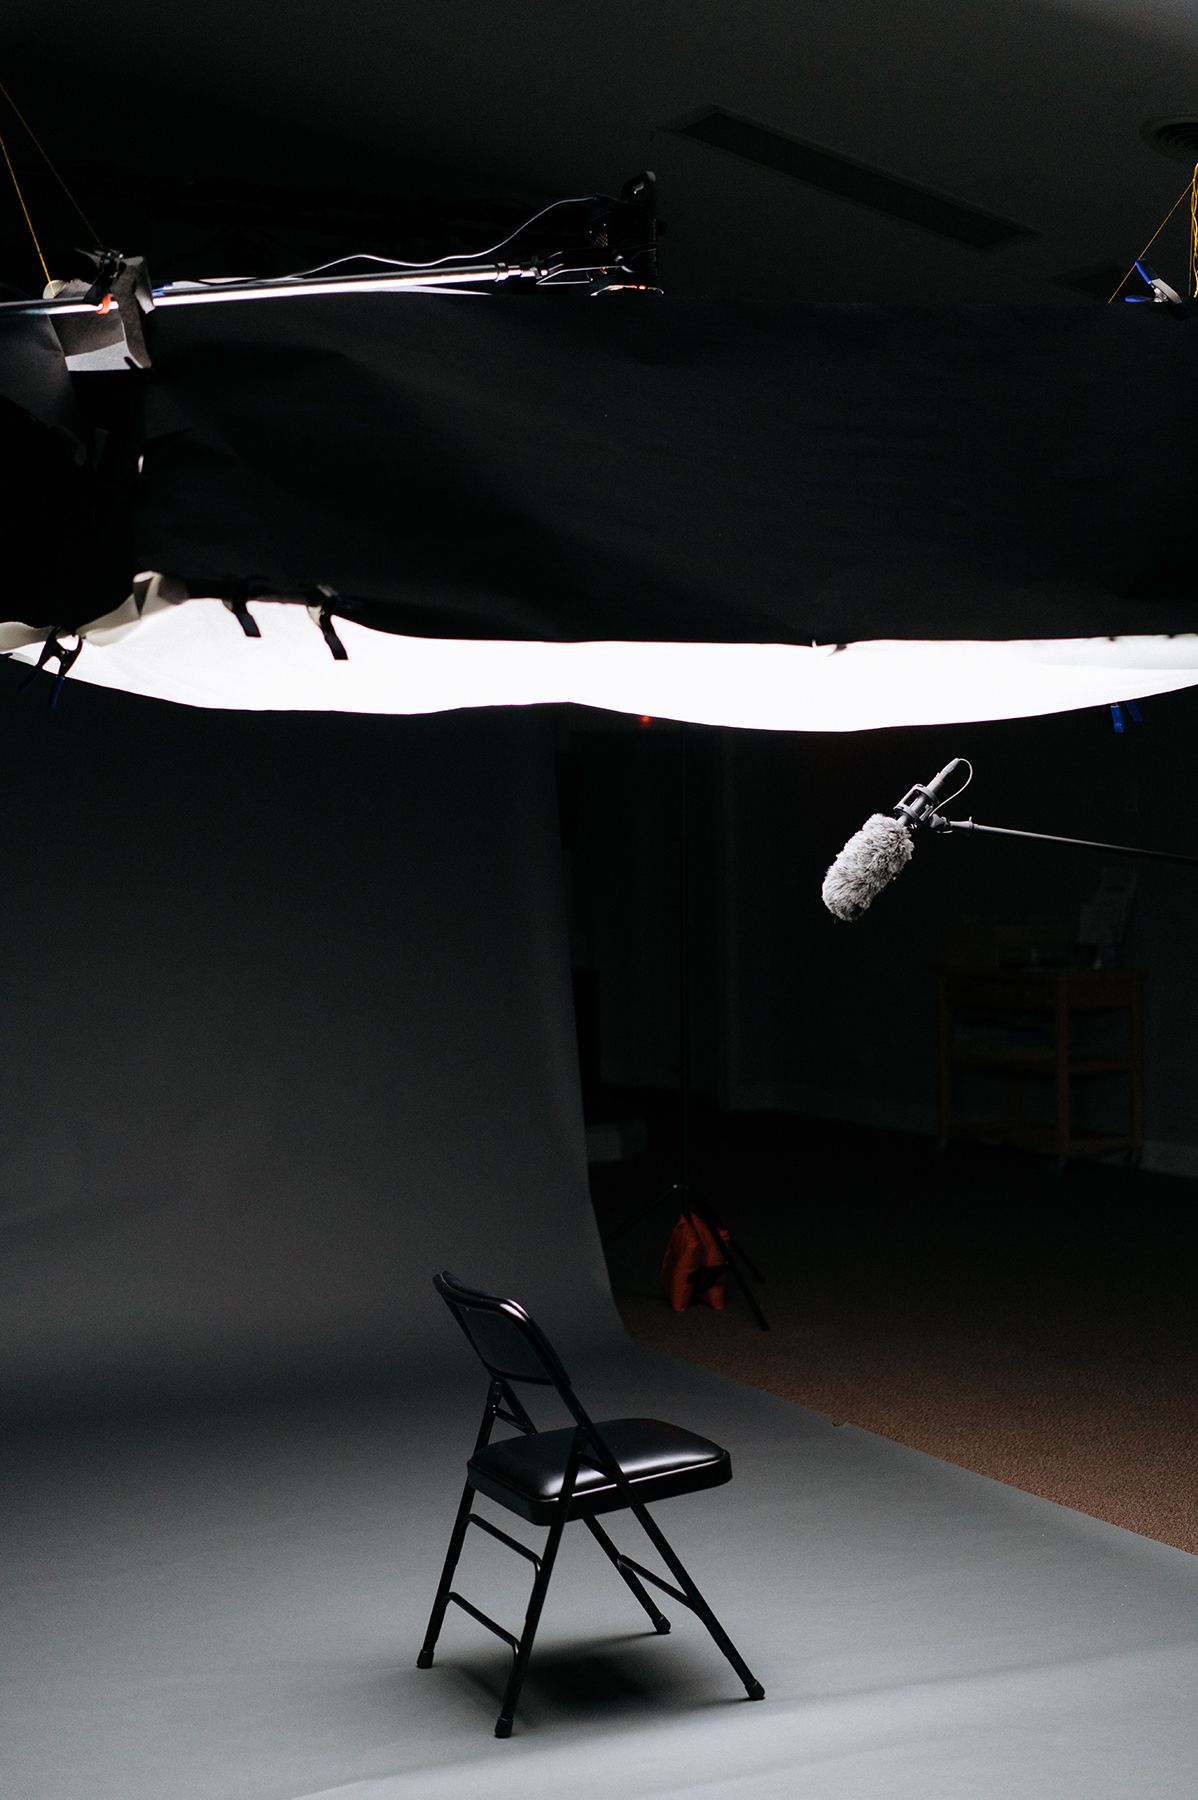 Chair on a seamless background with a microphone overhead